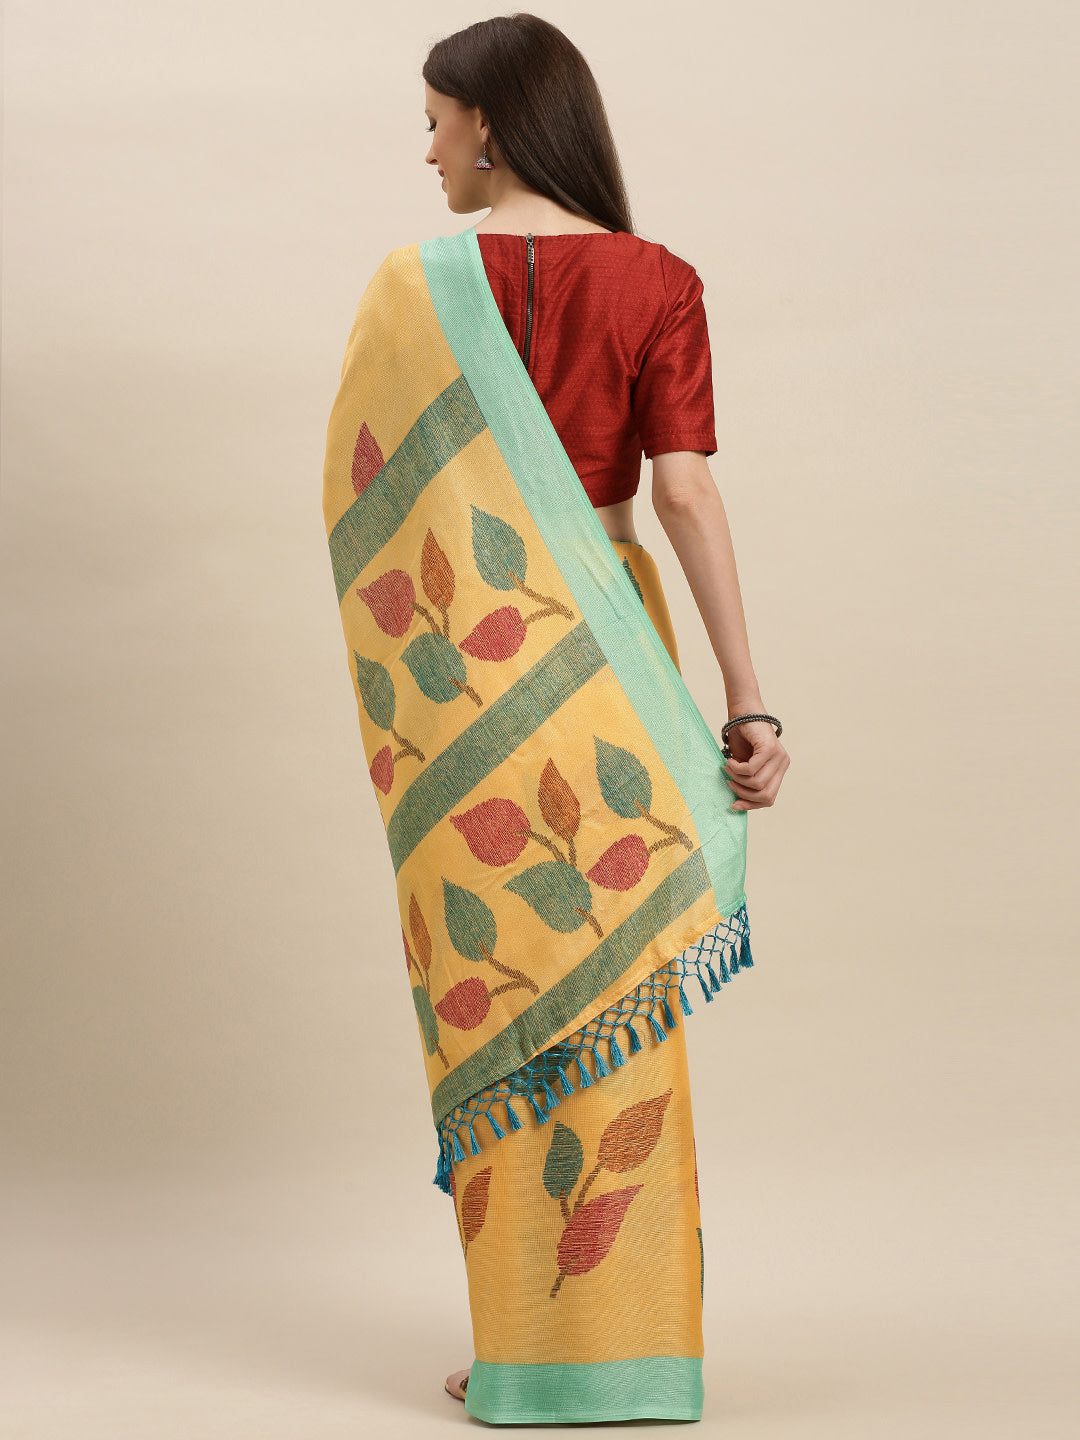  Stylish Silk Saree With Solid Floral Print